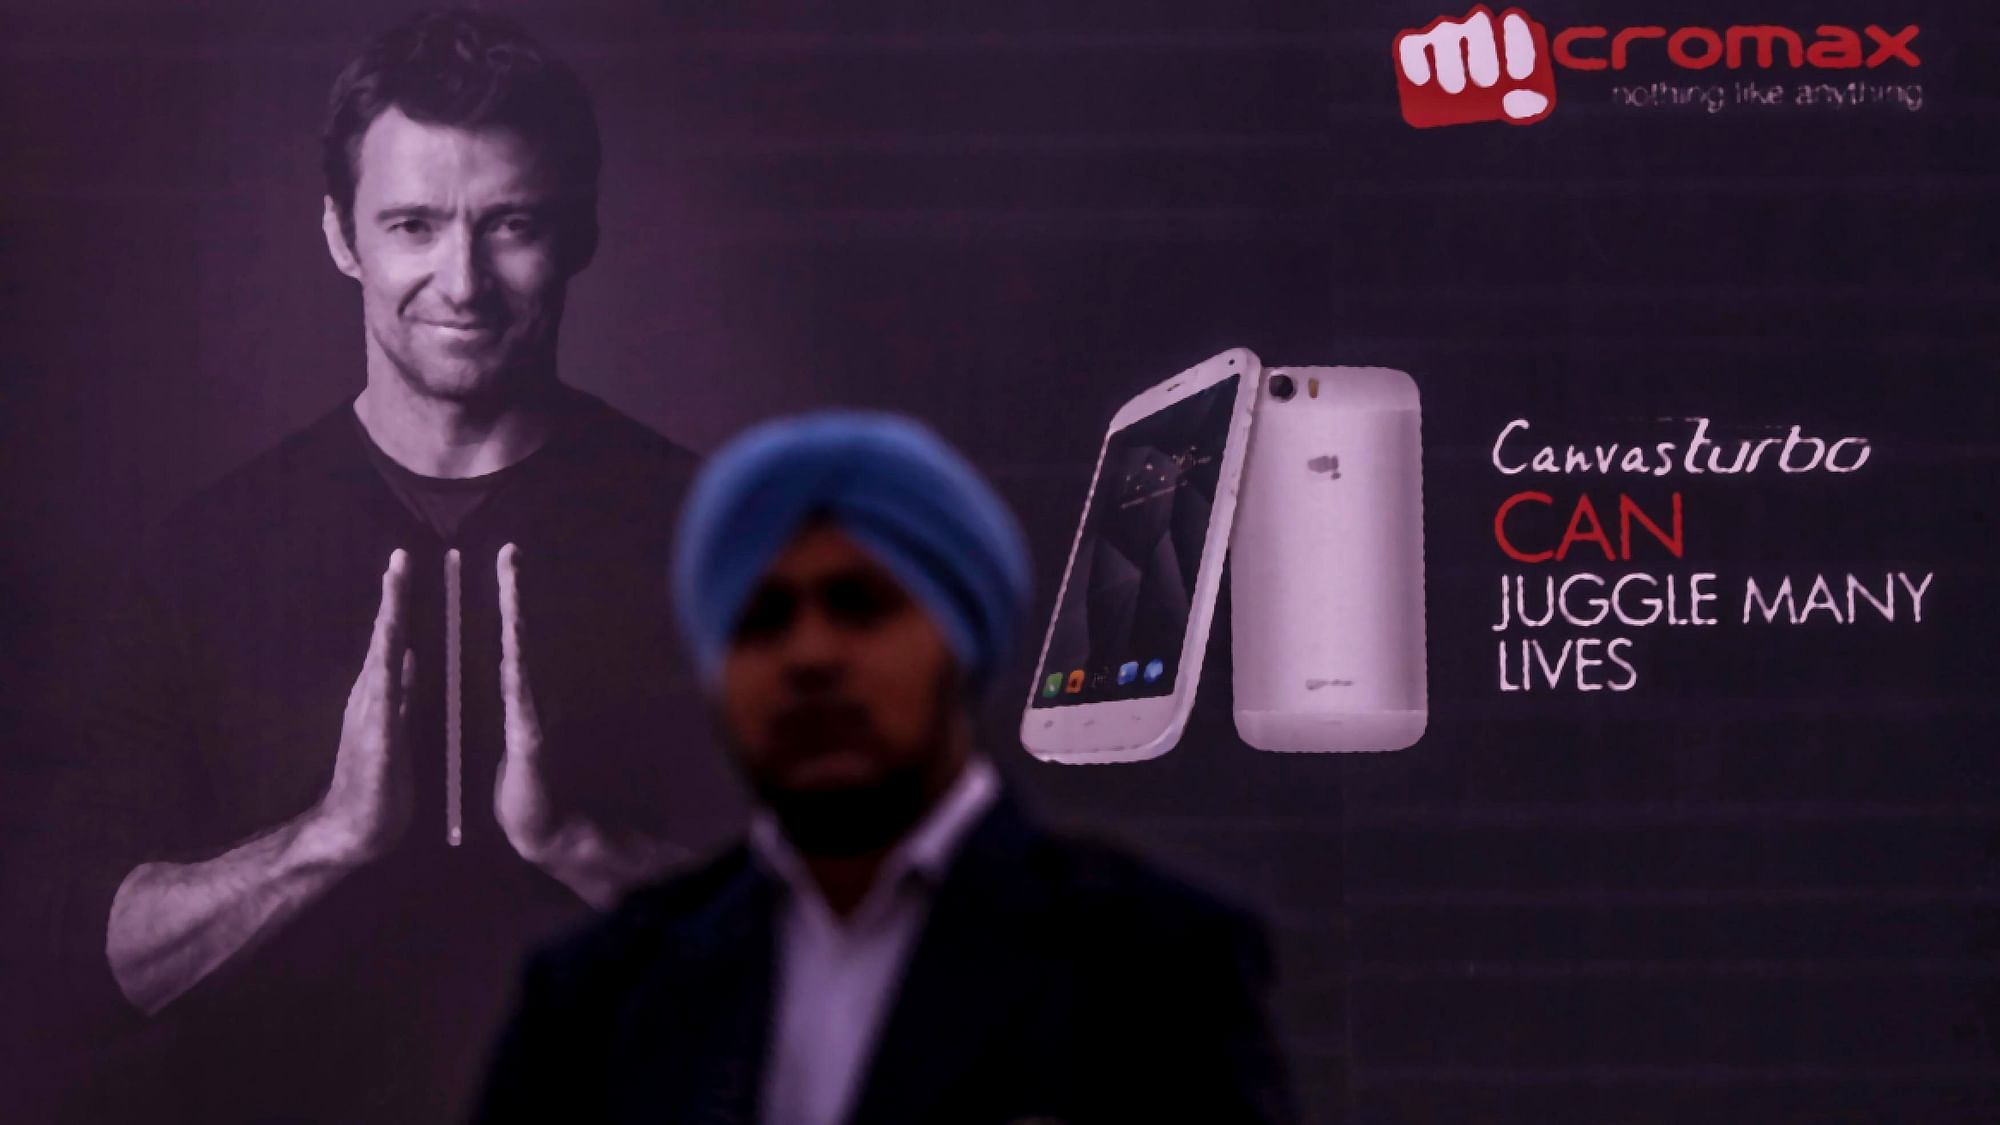 Hugh Jackman was made the brand ambassador of Micromax for a brief period. 